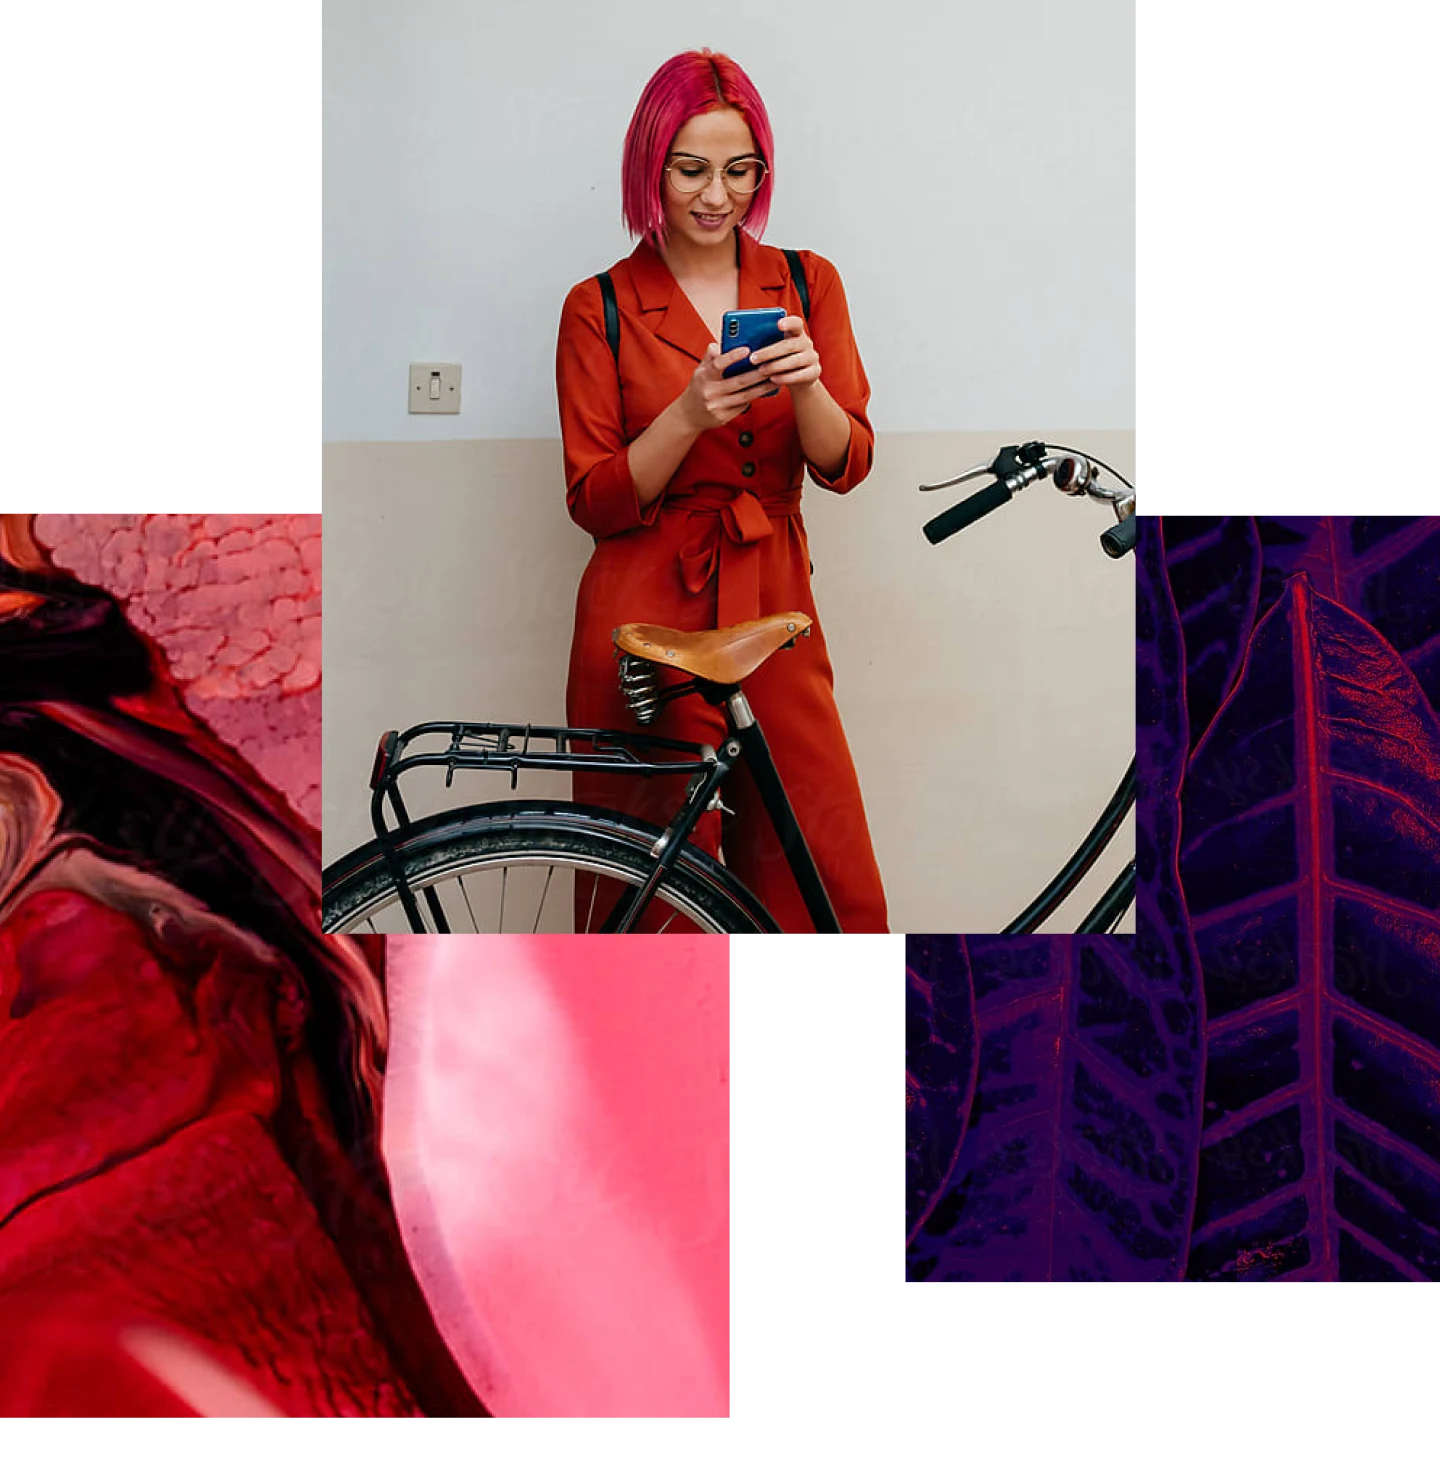 A trio of images with a red motif featuring a White woman with red hair holding a cellphone in front of a bicycle